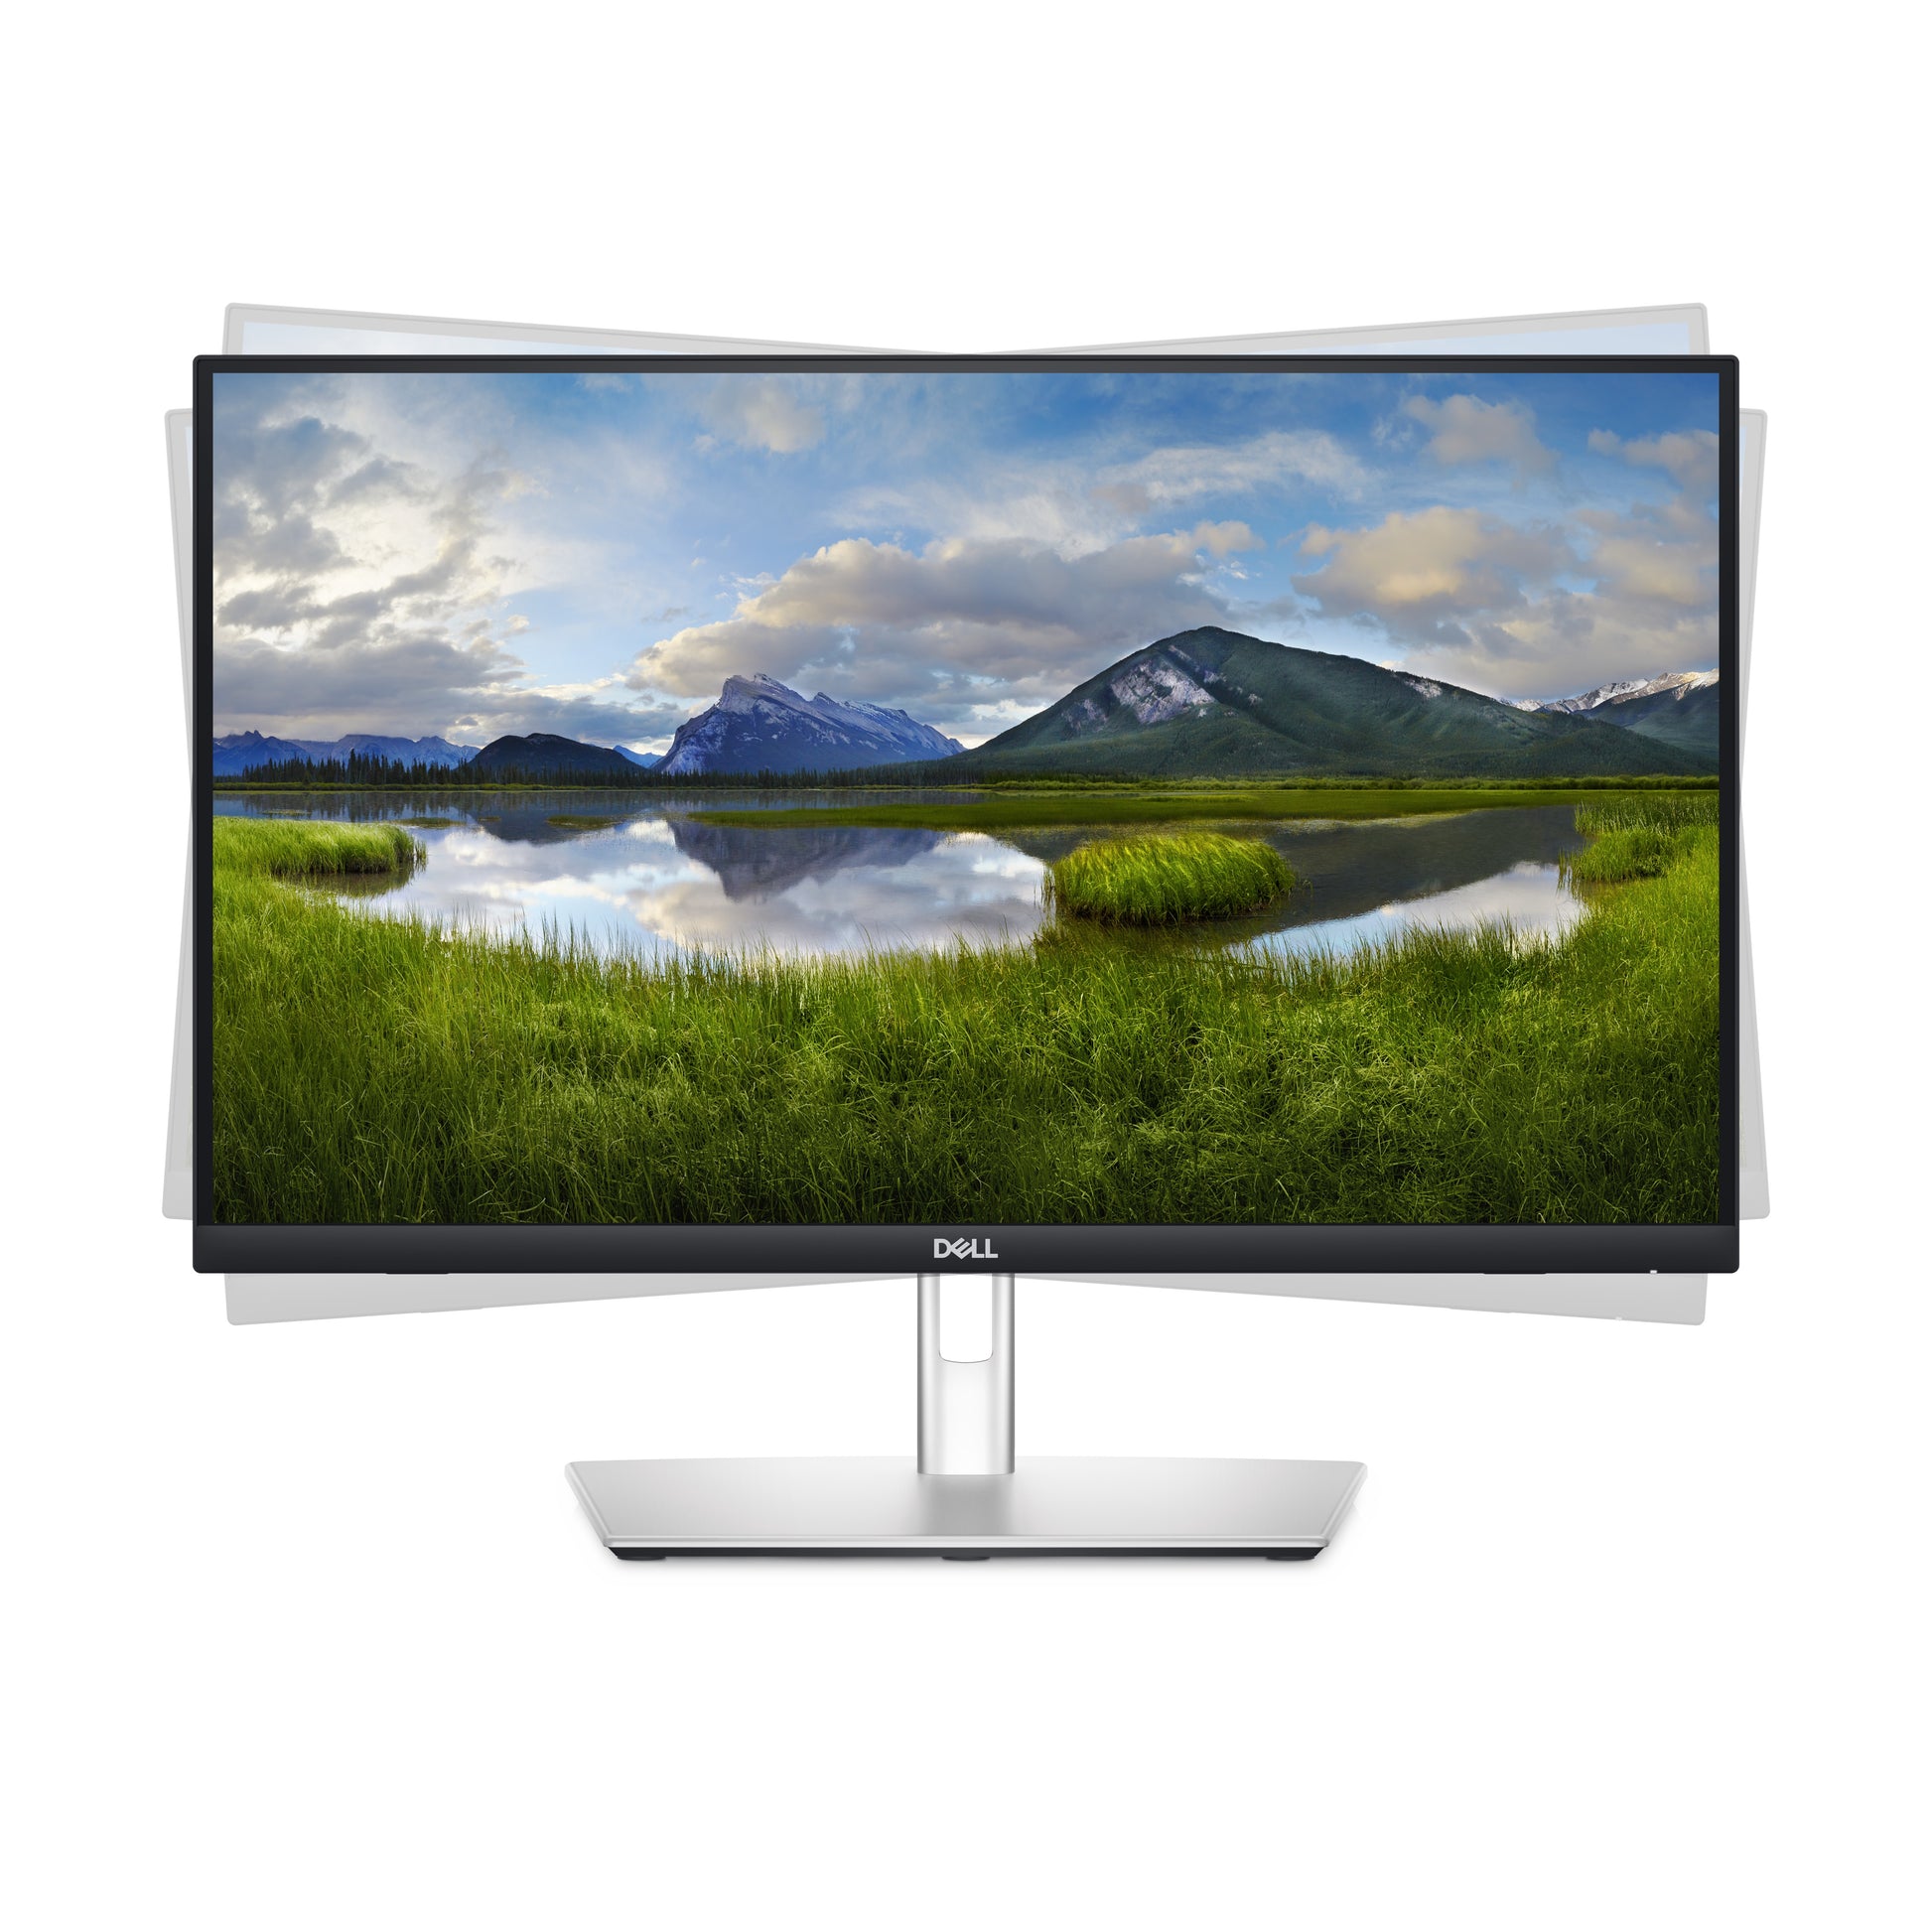 DELL P Series P2424HT computer monitor 60.5 cm (23.8") 1920 x 1080 pixels Full HD LCD Touchscreen Black, Silver-10